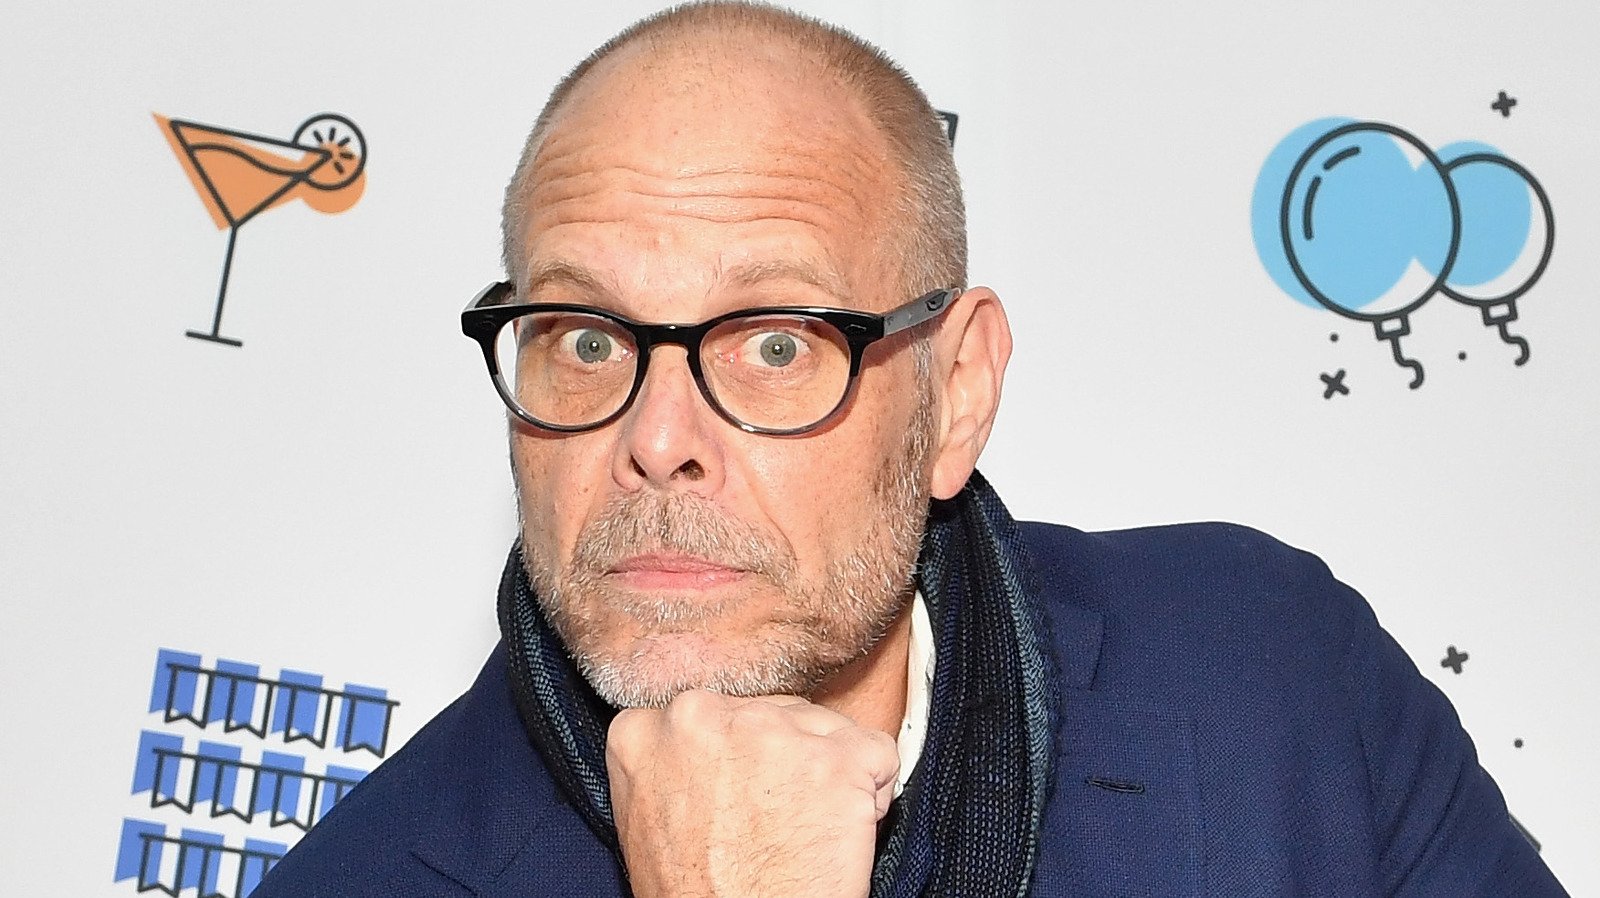 Alton Brown Is Teasing A New Project With An Ominous Name